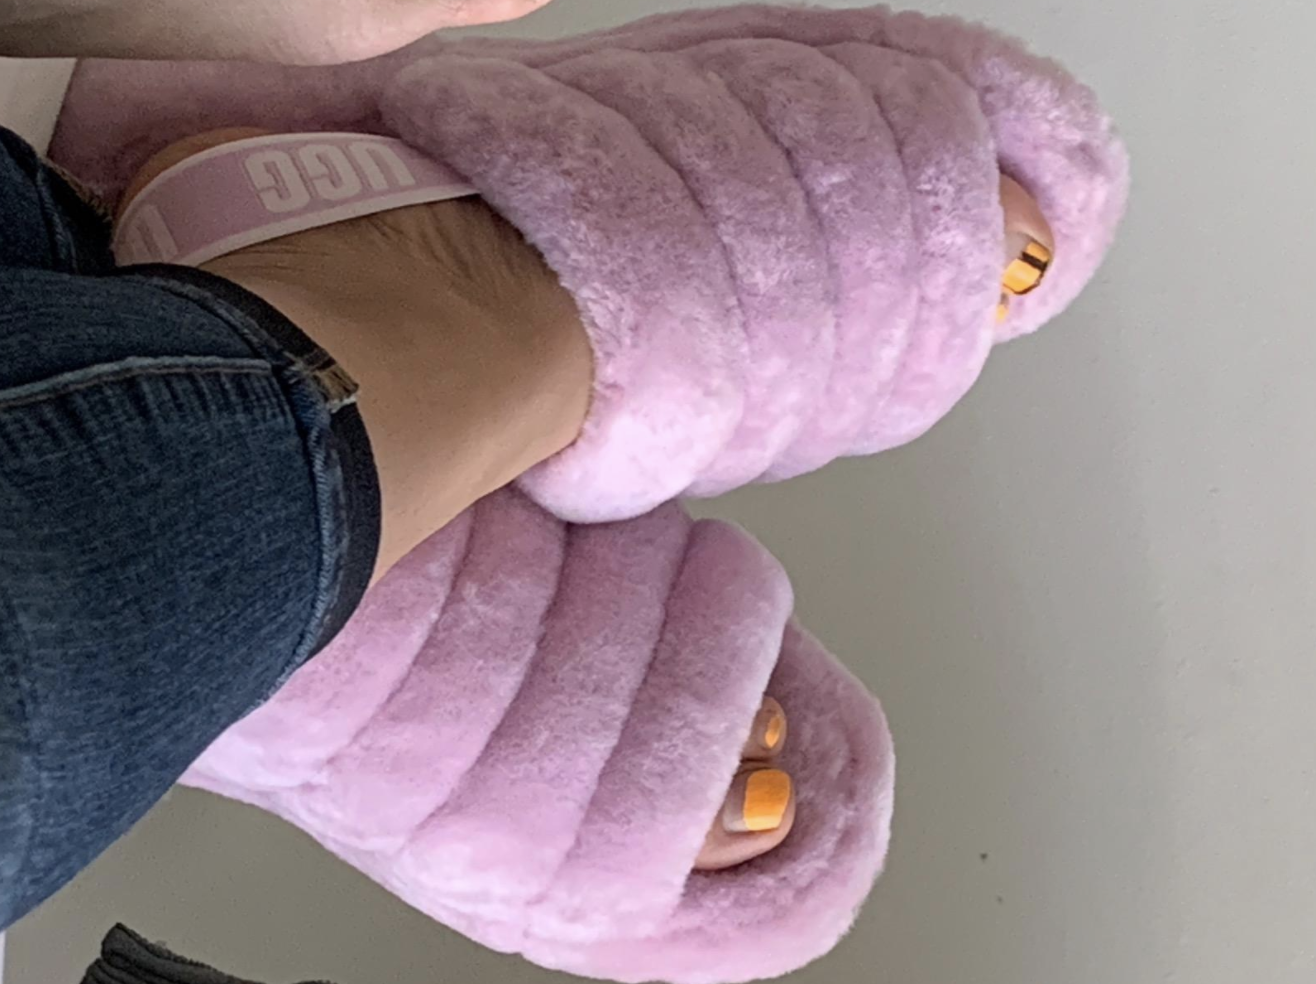 Amazon customer wears UGG slippers in California Aster color